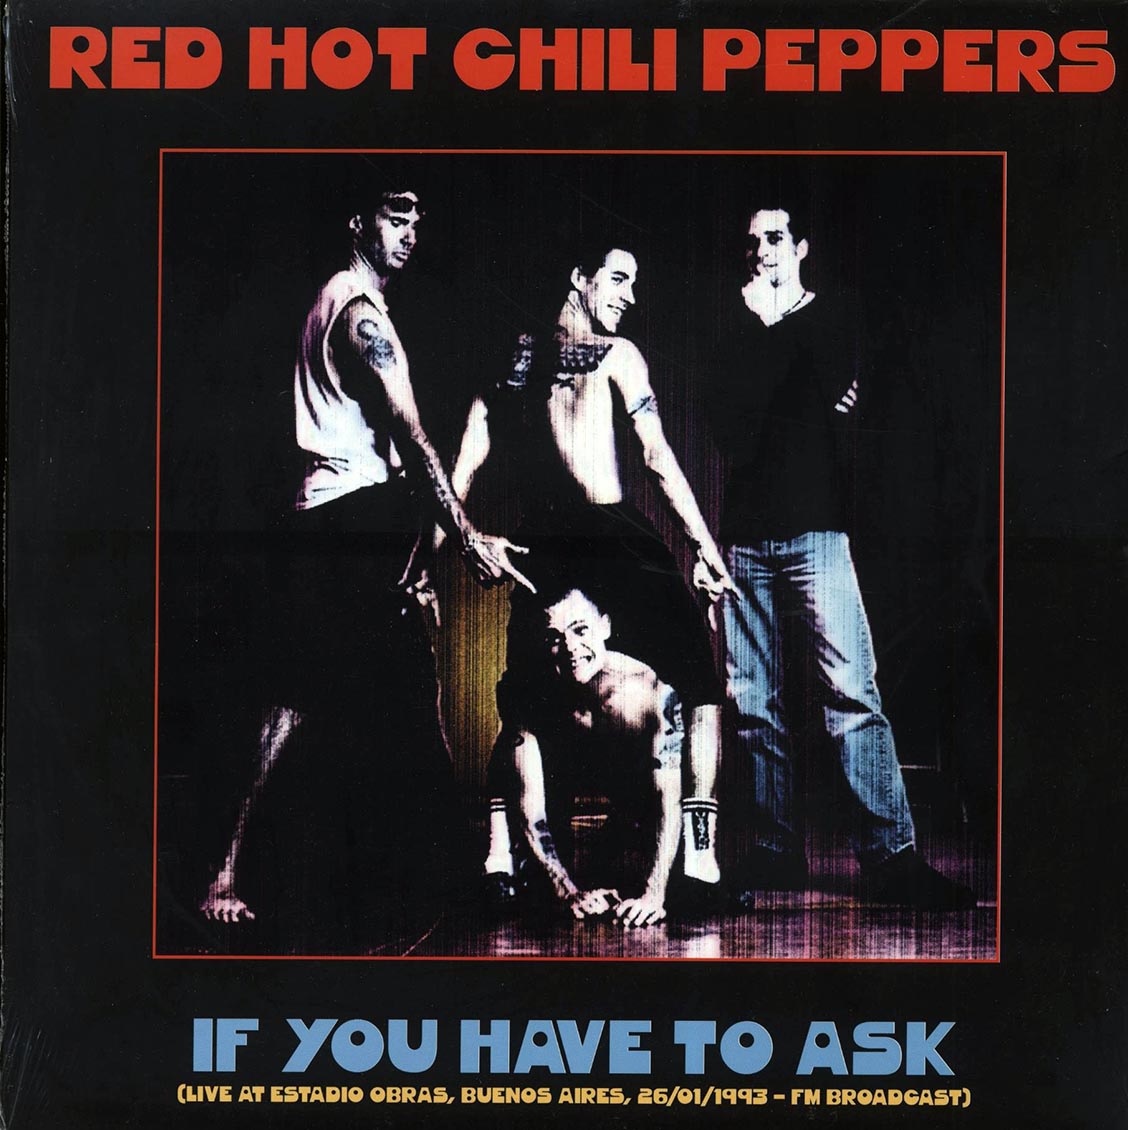 Red Hot Chili Peppers - If You Have To Ask: Live At Estadio Obras, Buenos Aires, 26/01/1993 FM Broadcast